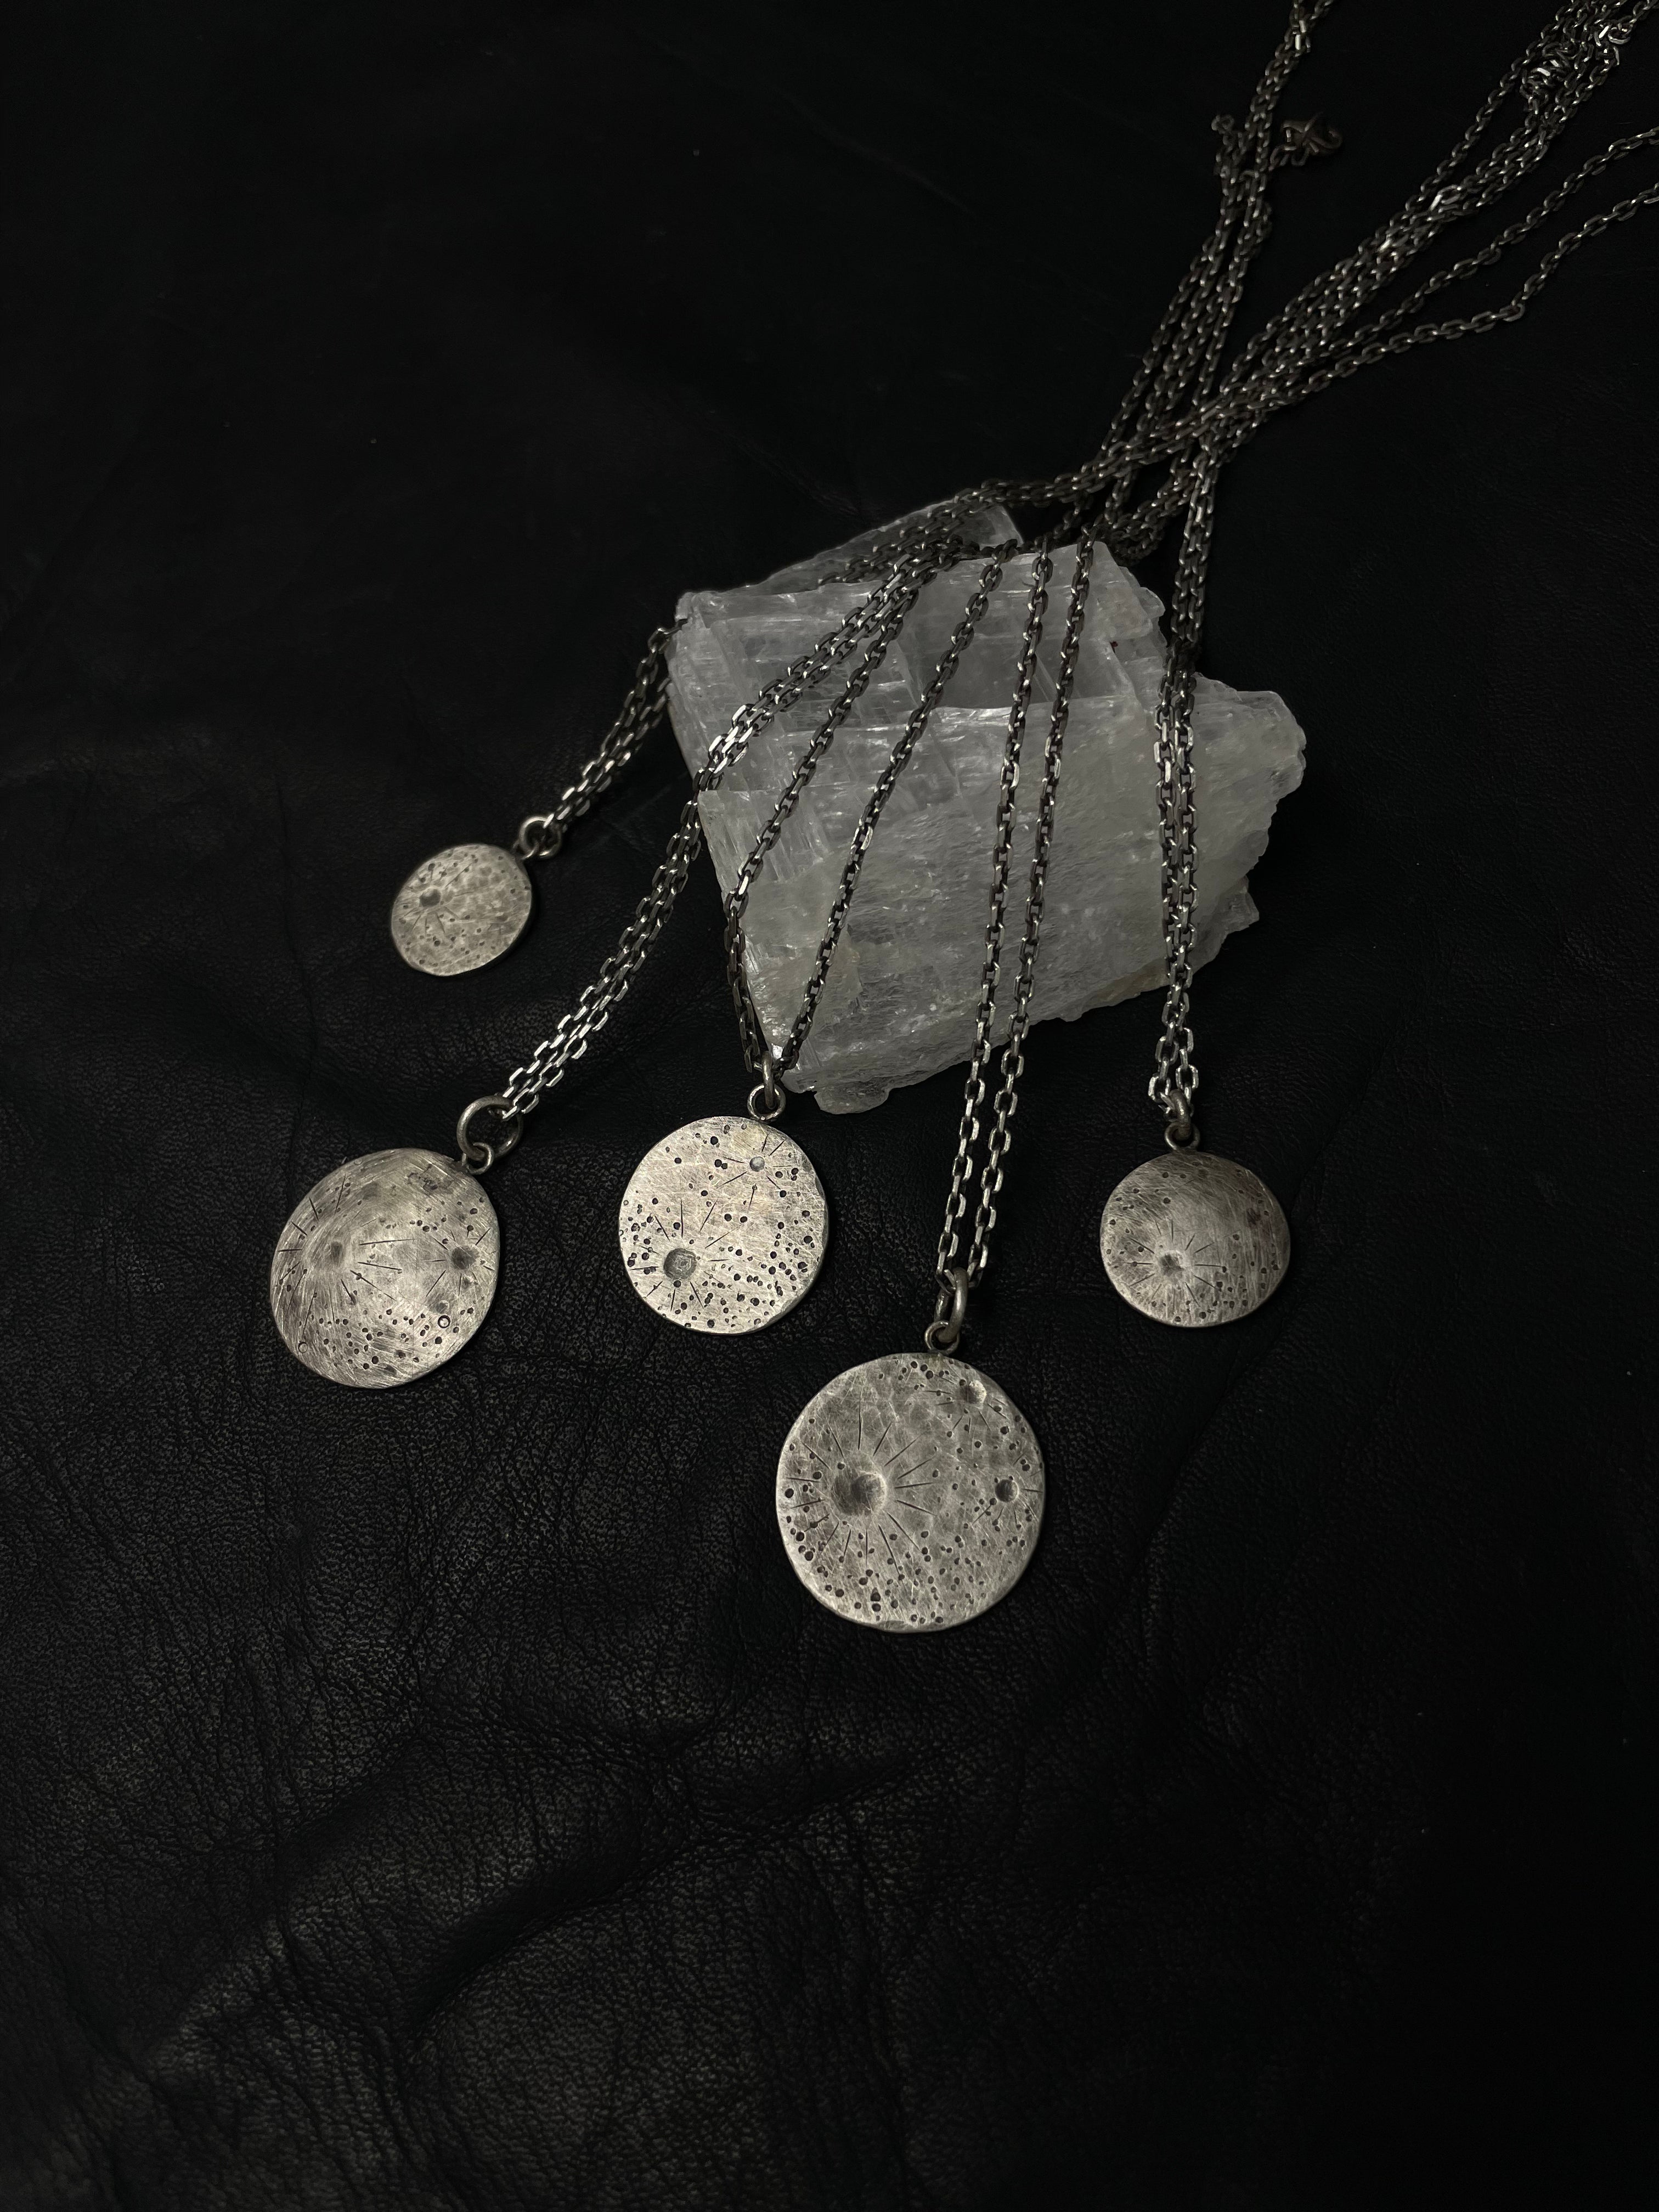 Full Moon Pendant Necklace - Ready to Ship